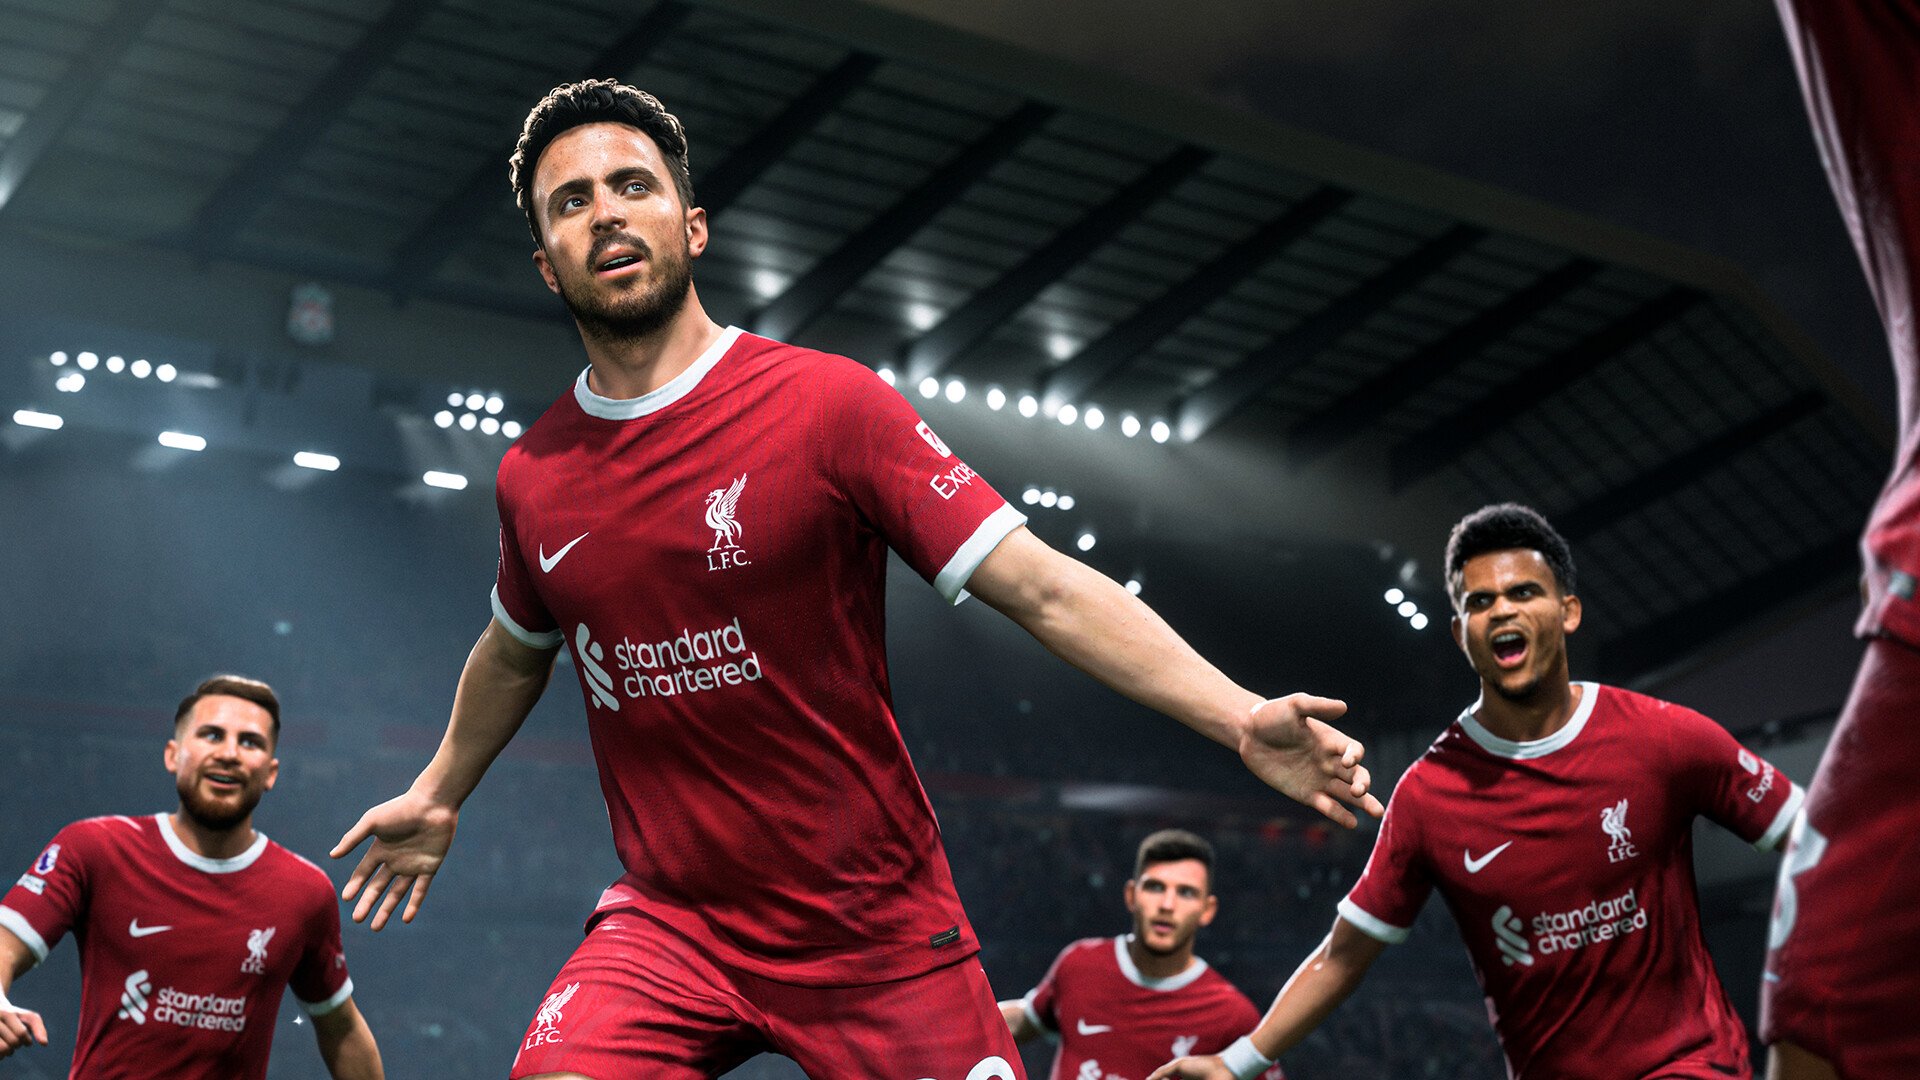 EA Sports FC 24 vs FIFA 23: What are the new features?